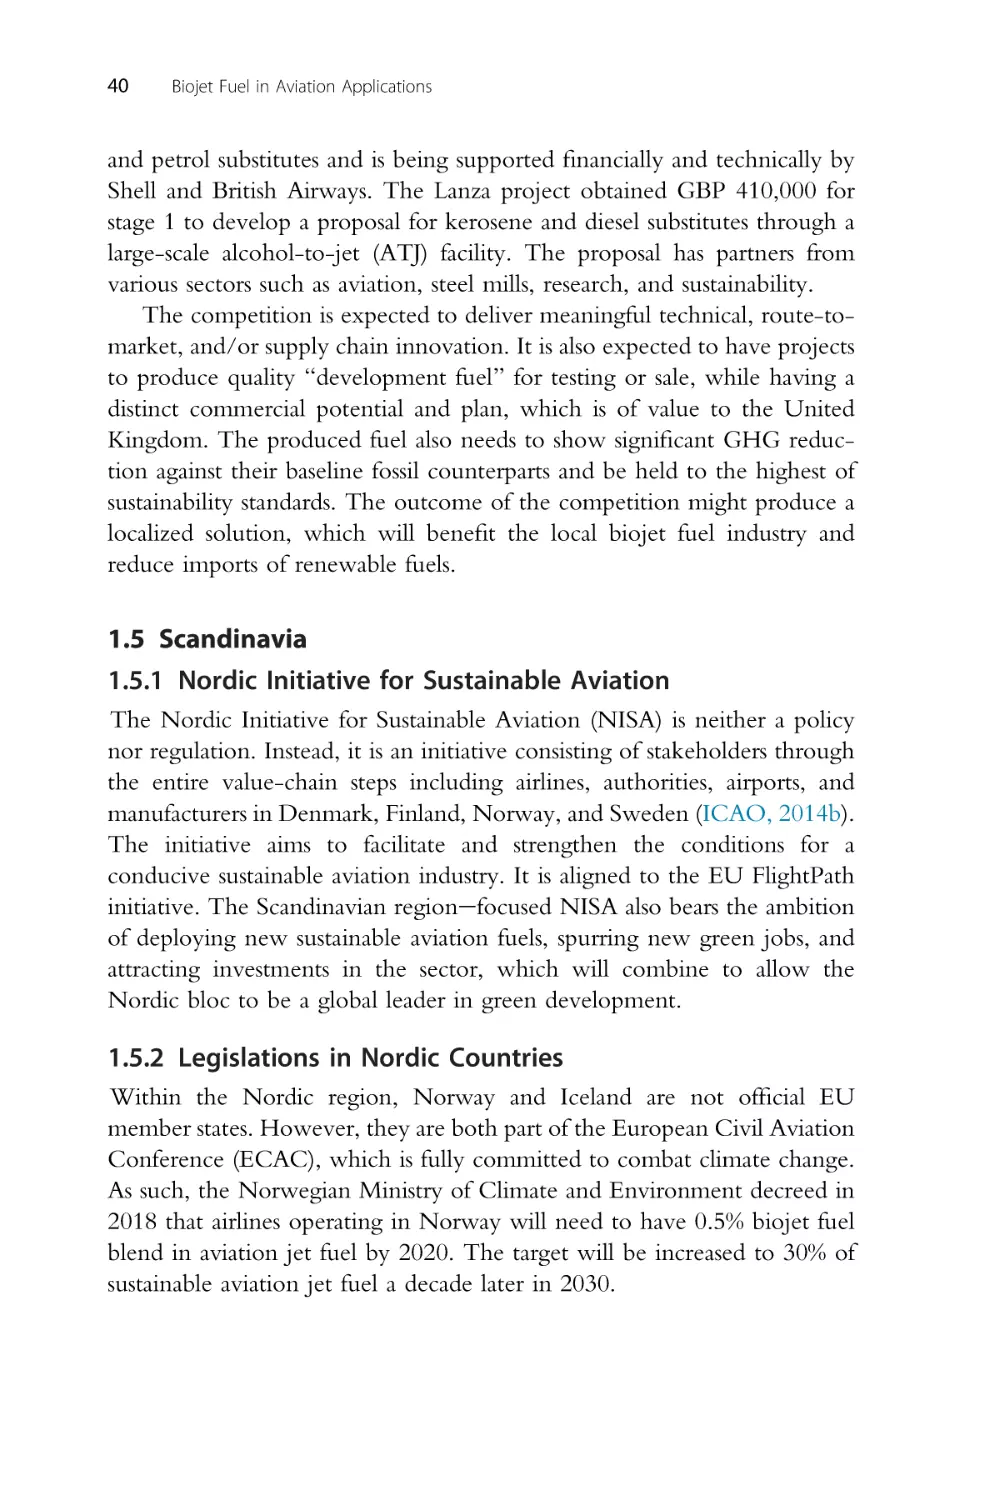 1.5 Scandinavia
1.5.1 Nordic Initiative for Sustainable Aviation
1.5.2 Legislations in Nordic Countries